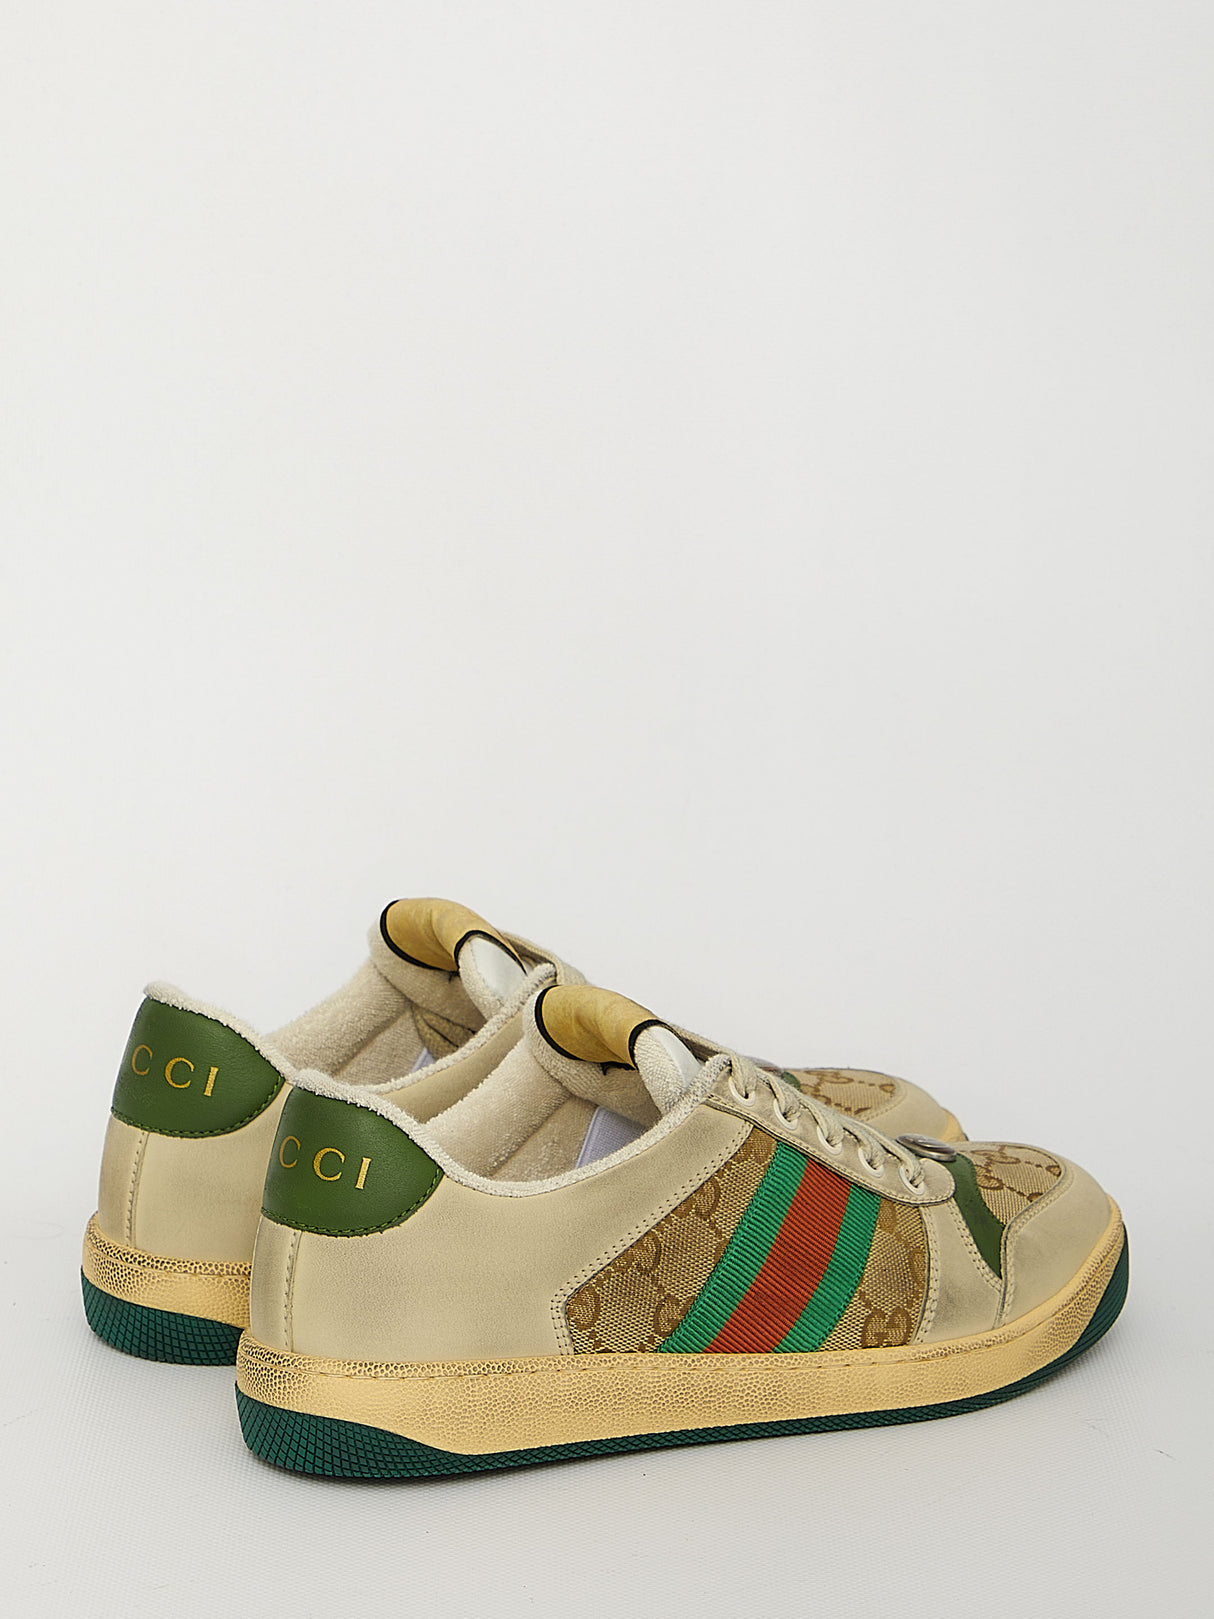 GUCCI Vintage Effect White Leather and Canvas Sneakers with Green and Orange Details for Men